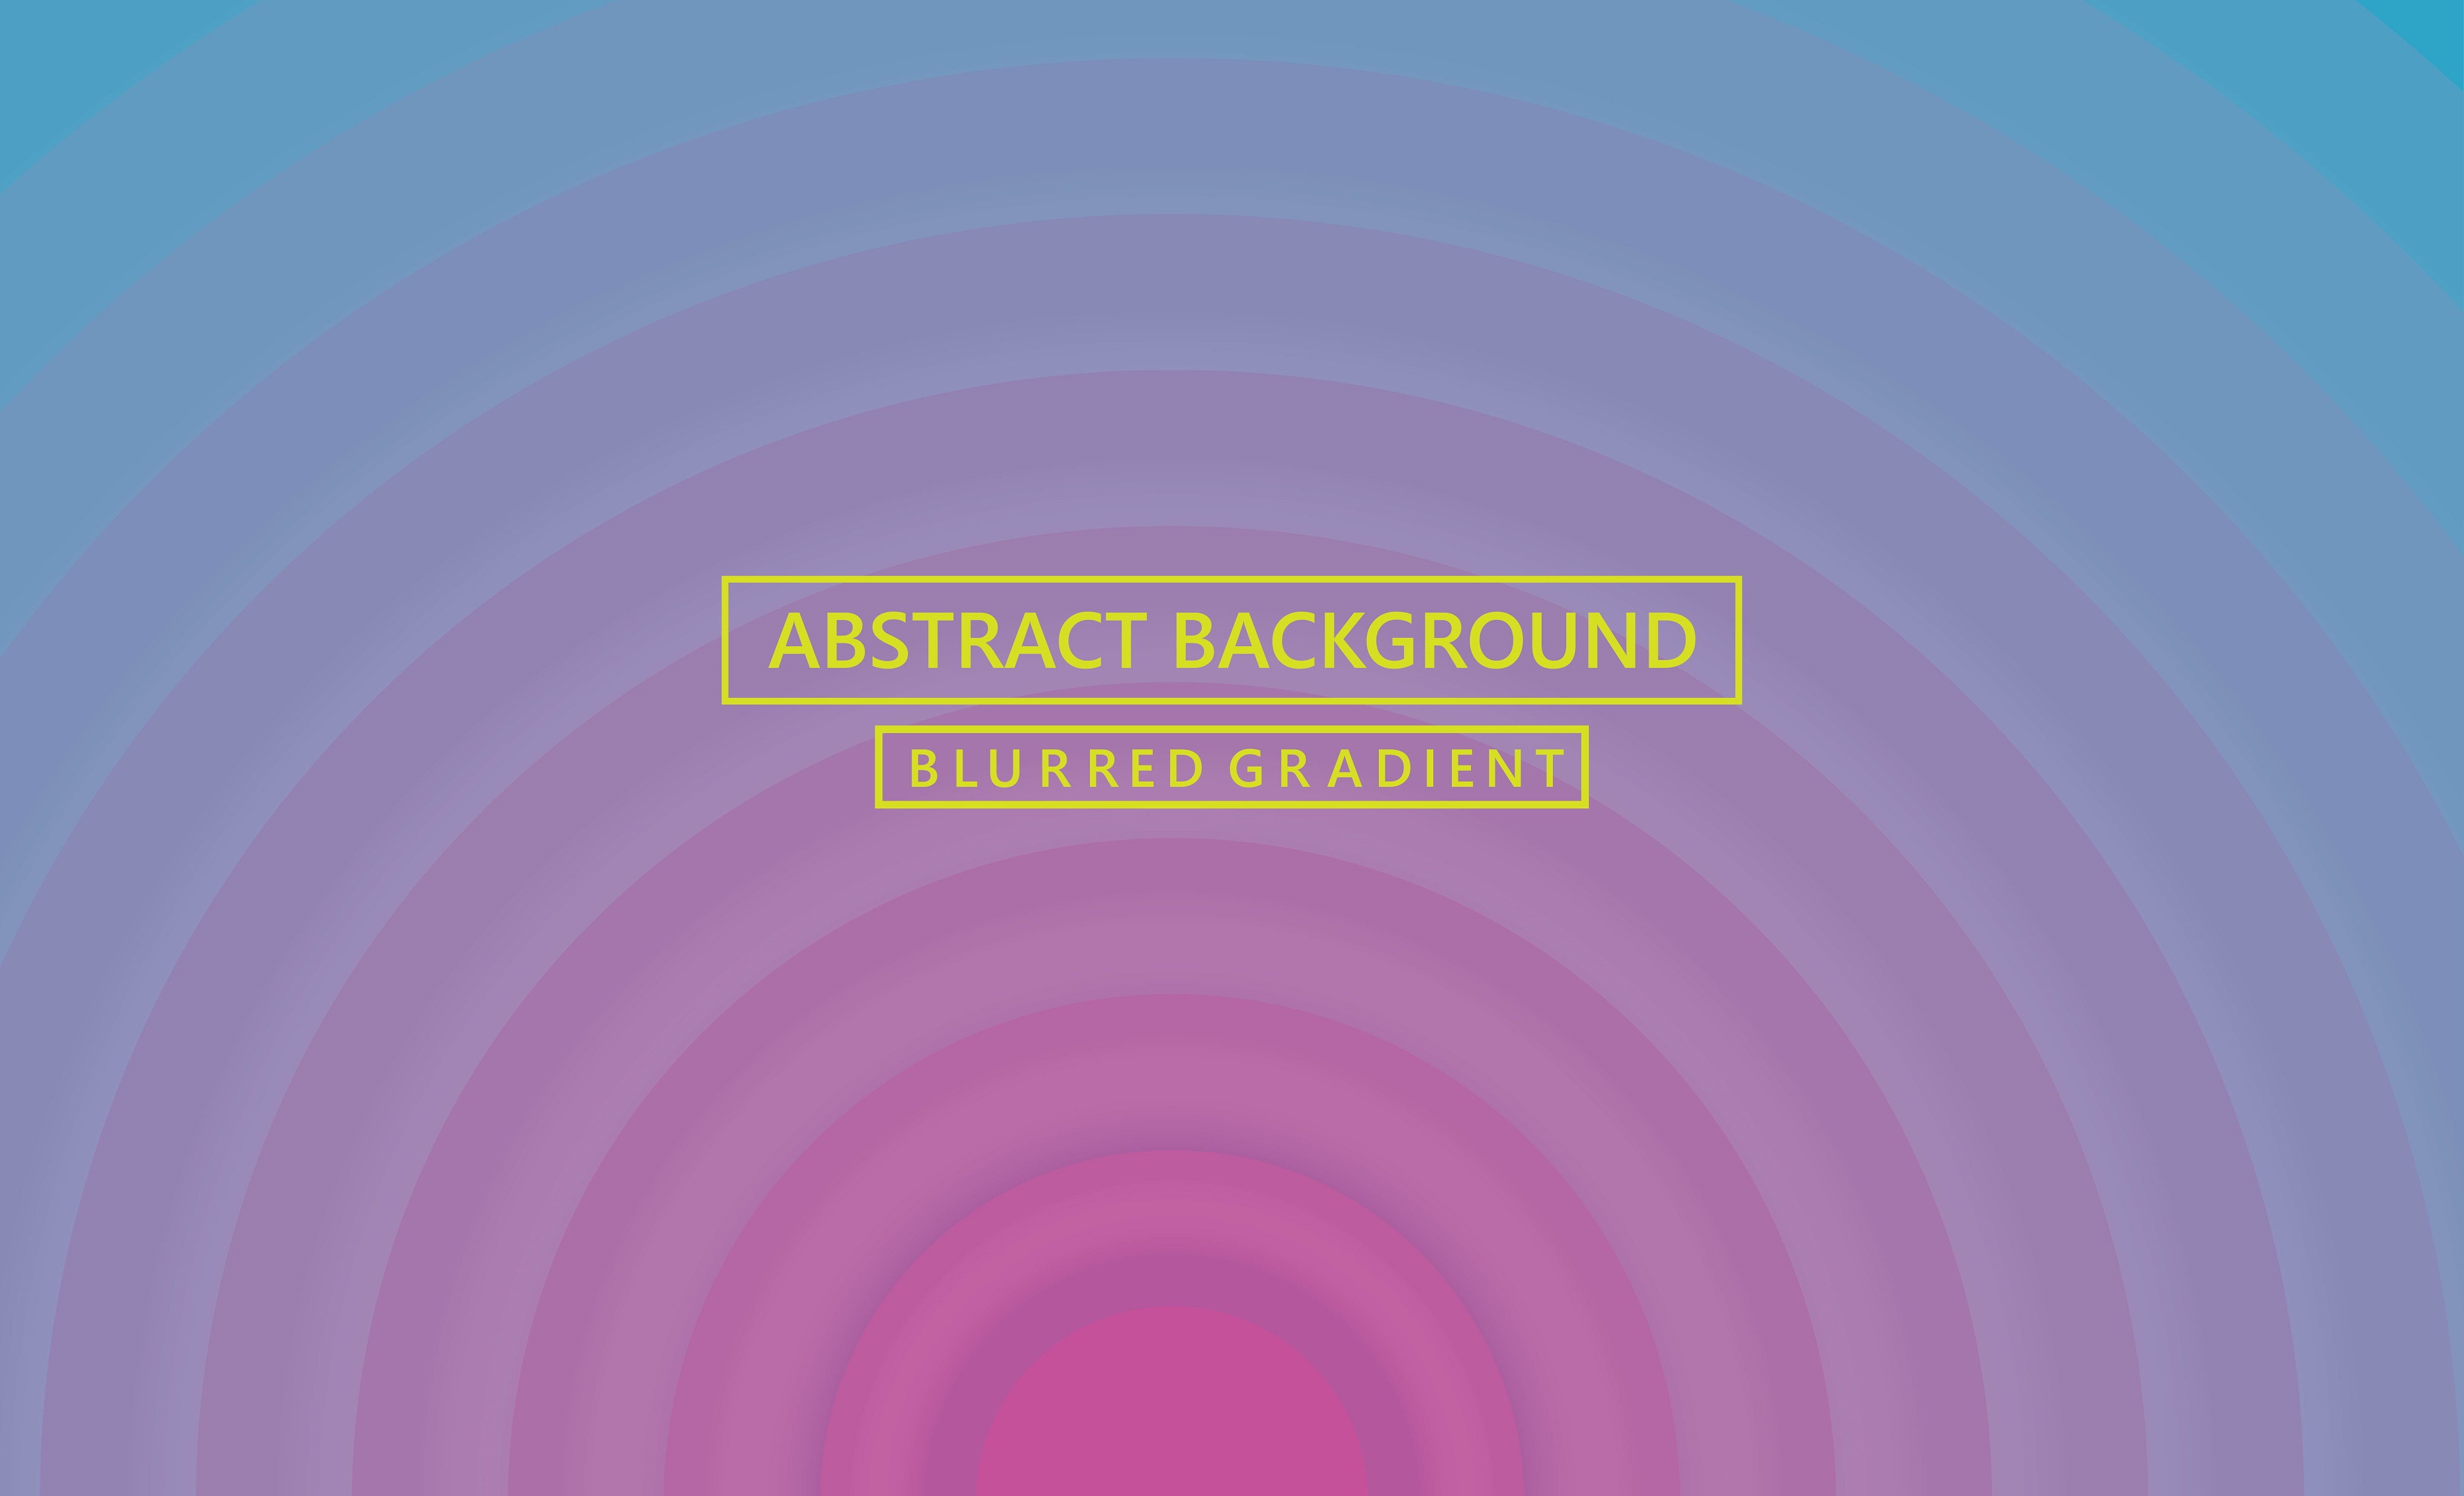 Abstract blurred gradient mesh background vector pinterest preview image.